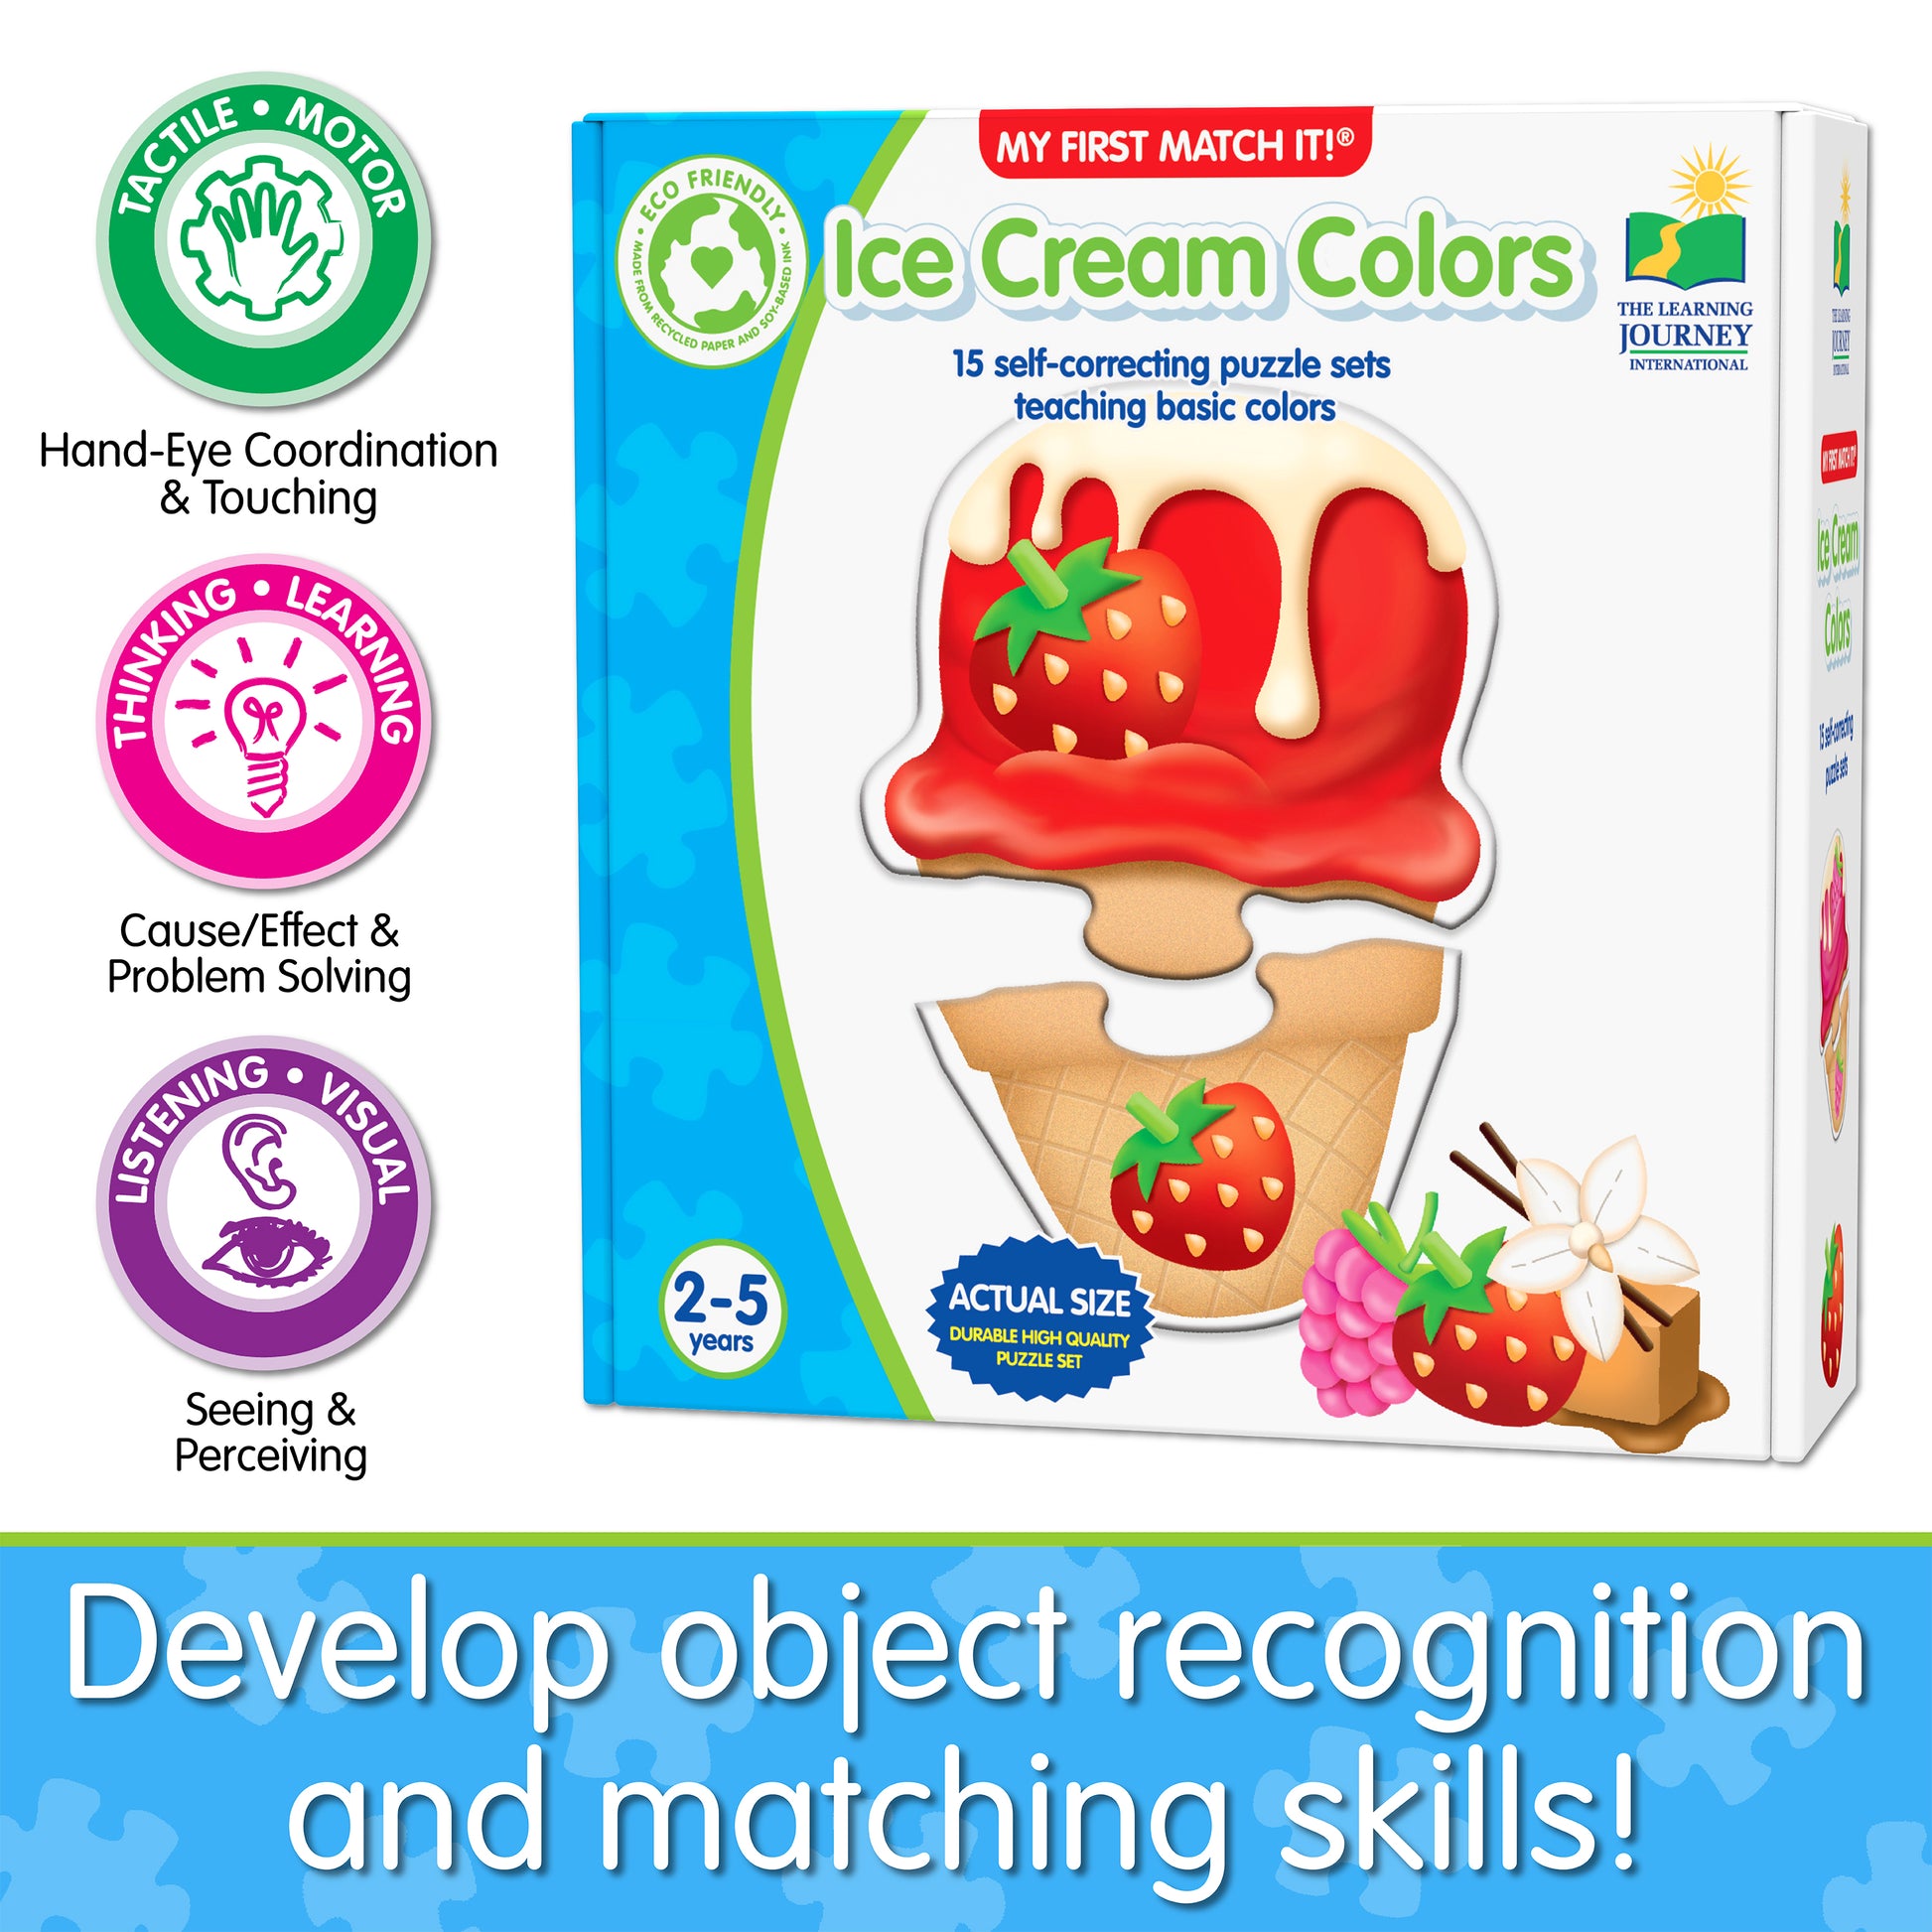 Infographic about My First Match It - Ice Cream Colors' educational benefits that says, "Develop object-recognition and matching skills!"